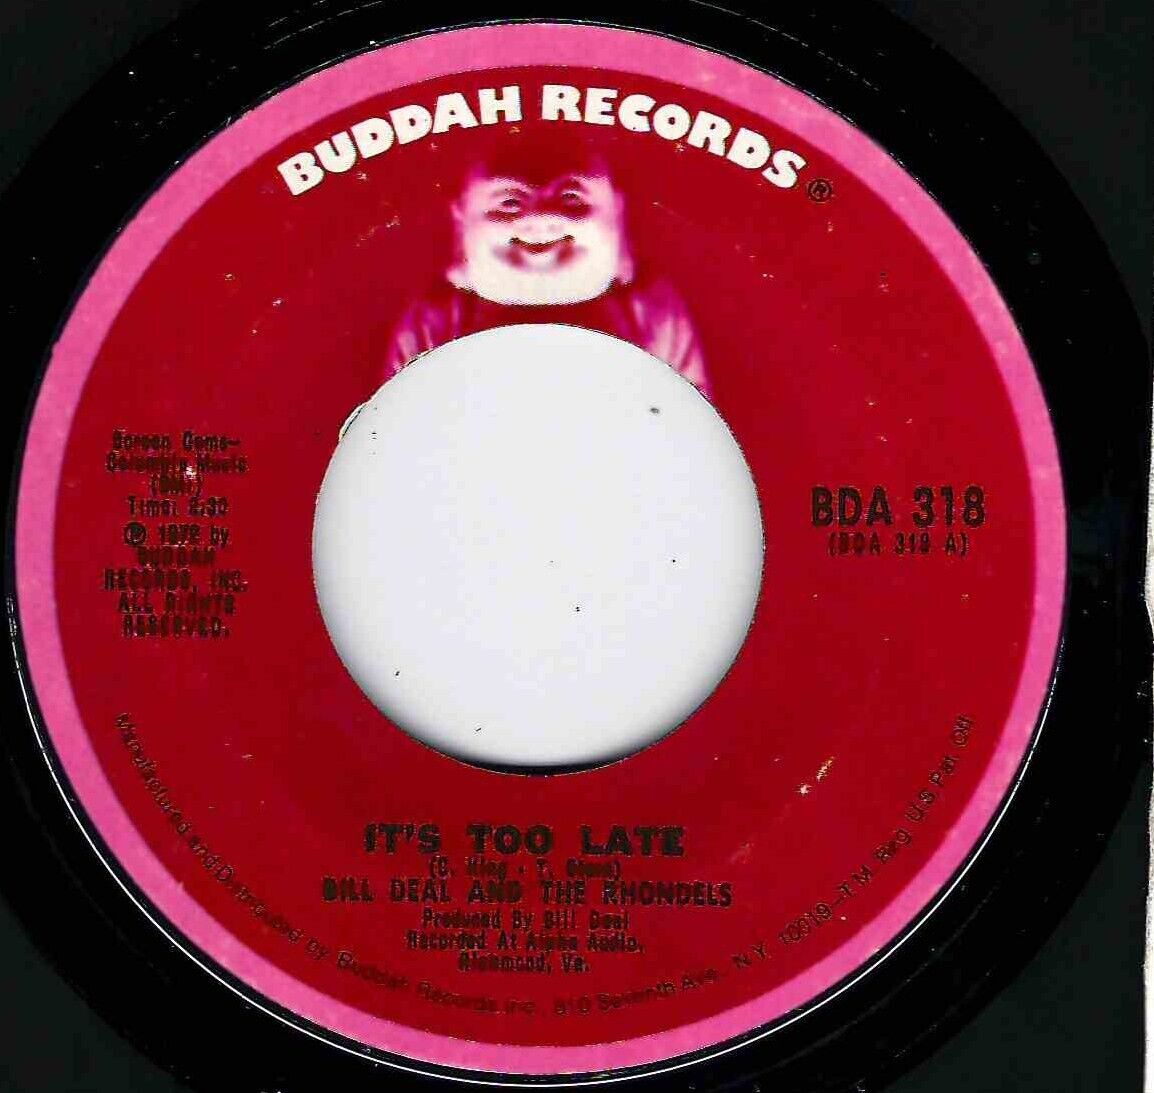 NORTHERN SOUL - BILL DEAL & THE RONDELLS - IT'S TOO  LATE - BUDDAH